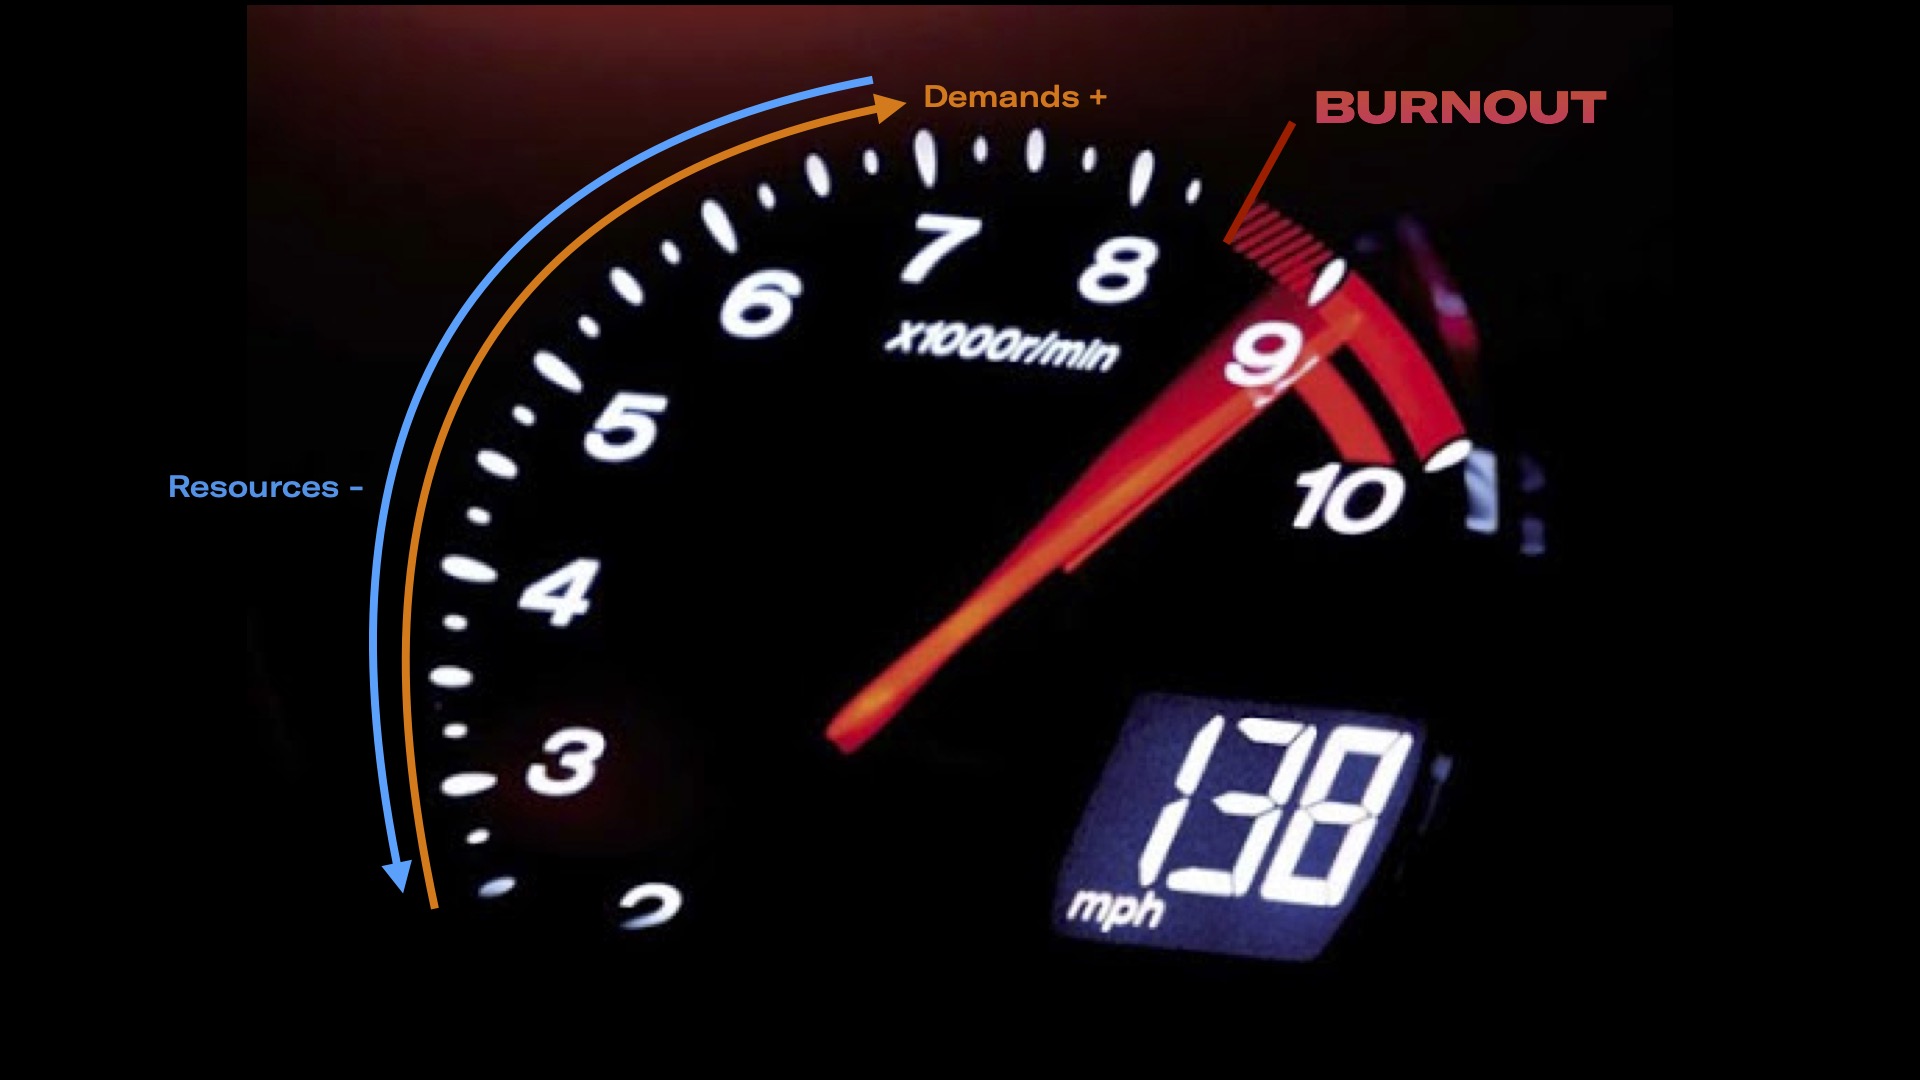 A tachometer for revolutions per minute shows drivers going up and resources going down, both building towards the 'redline' of Burnout.